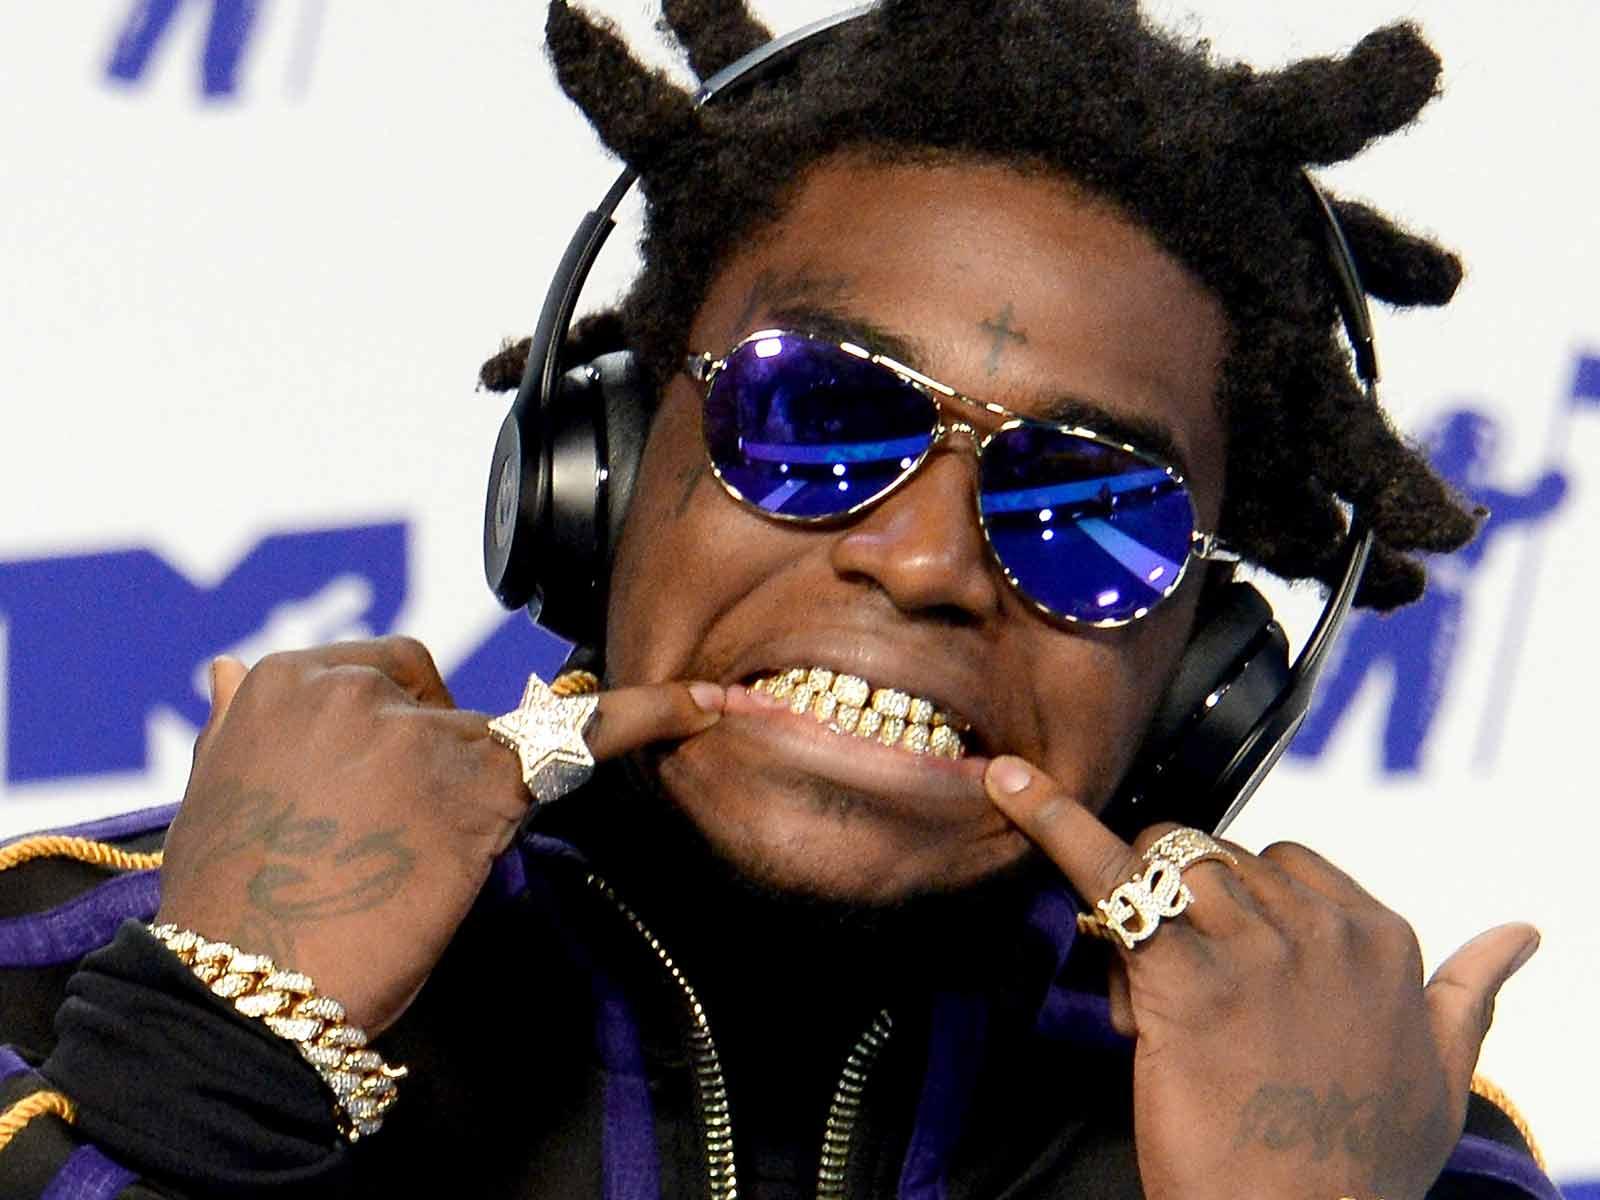 Kodak Black Ordered to Pay $4,000 a Month in Child Support for 2-Year-Old Son